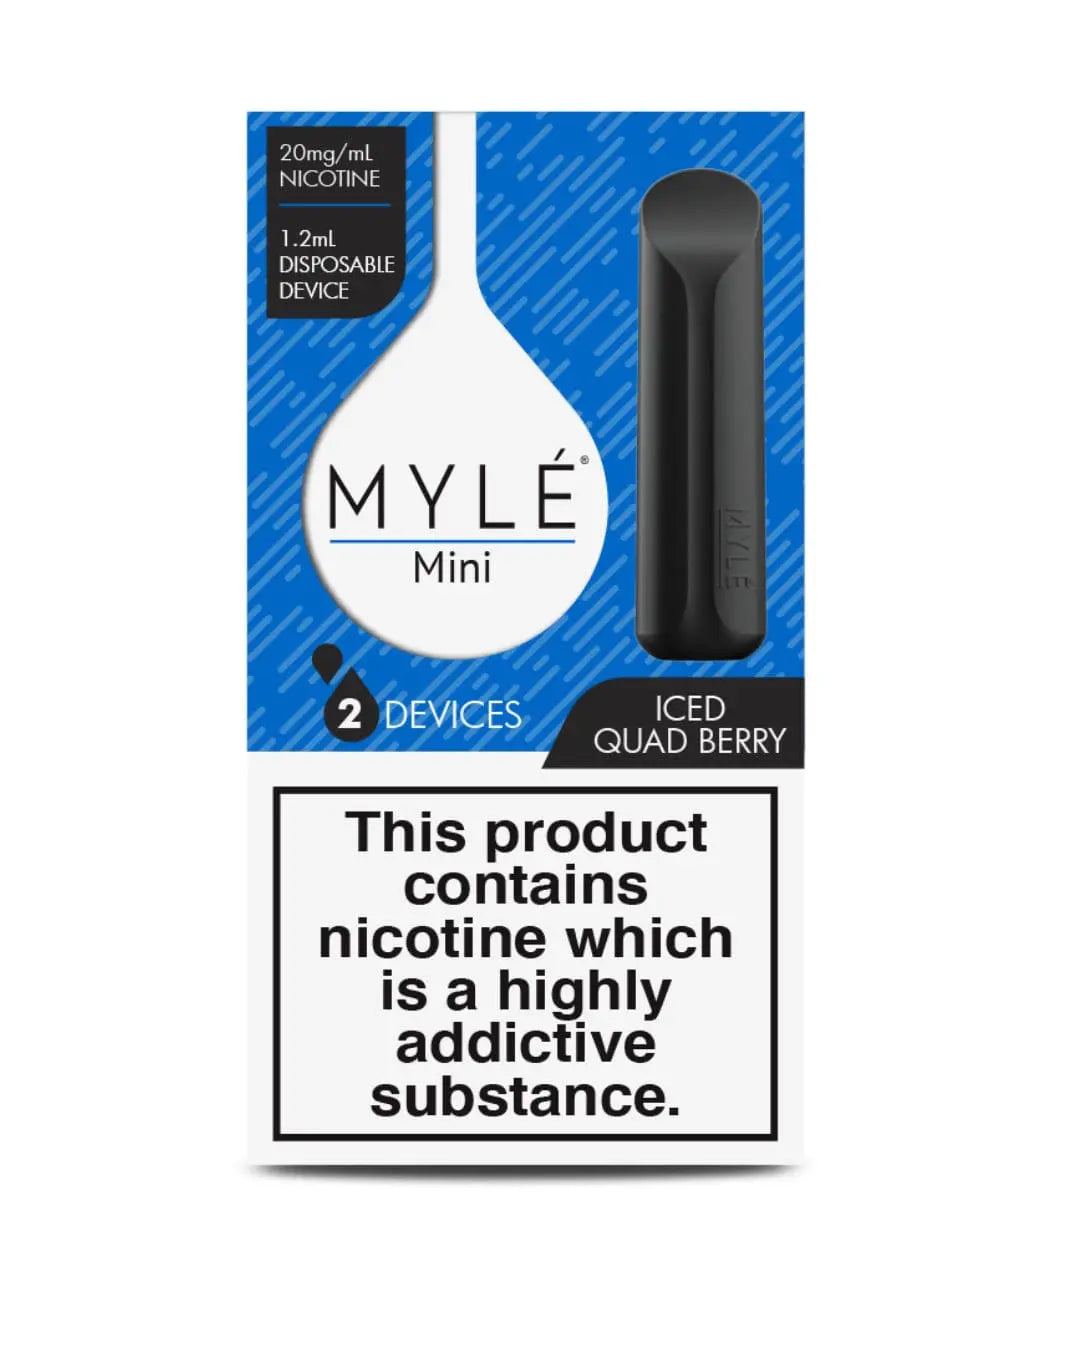 Iced Quad Berry - Mini Myle - Pack of 2 Devices Disposable Vapes